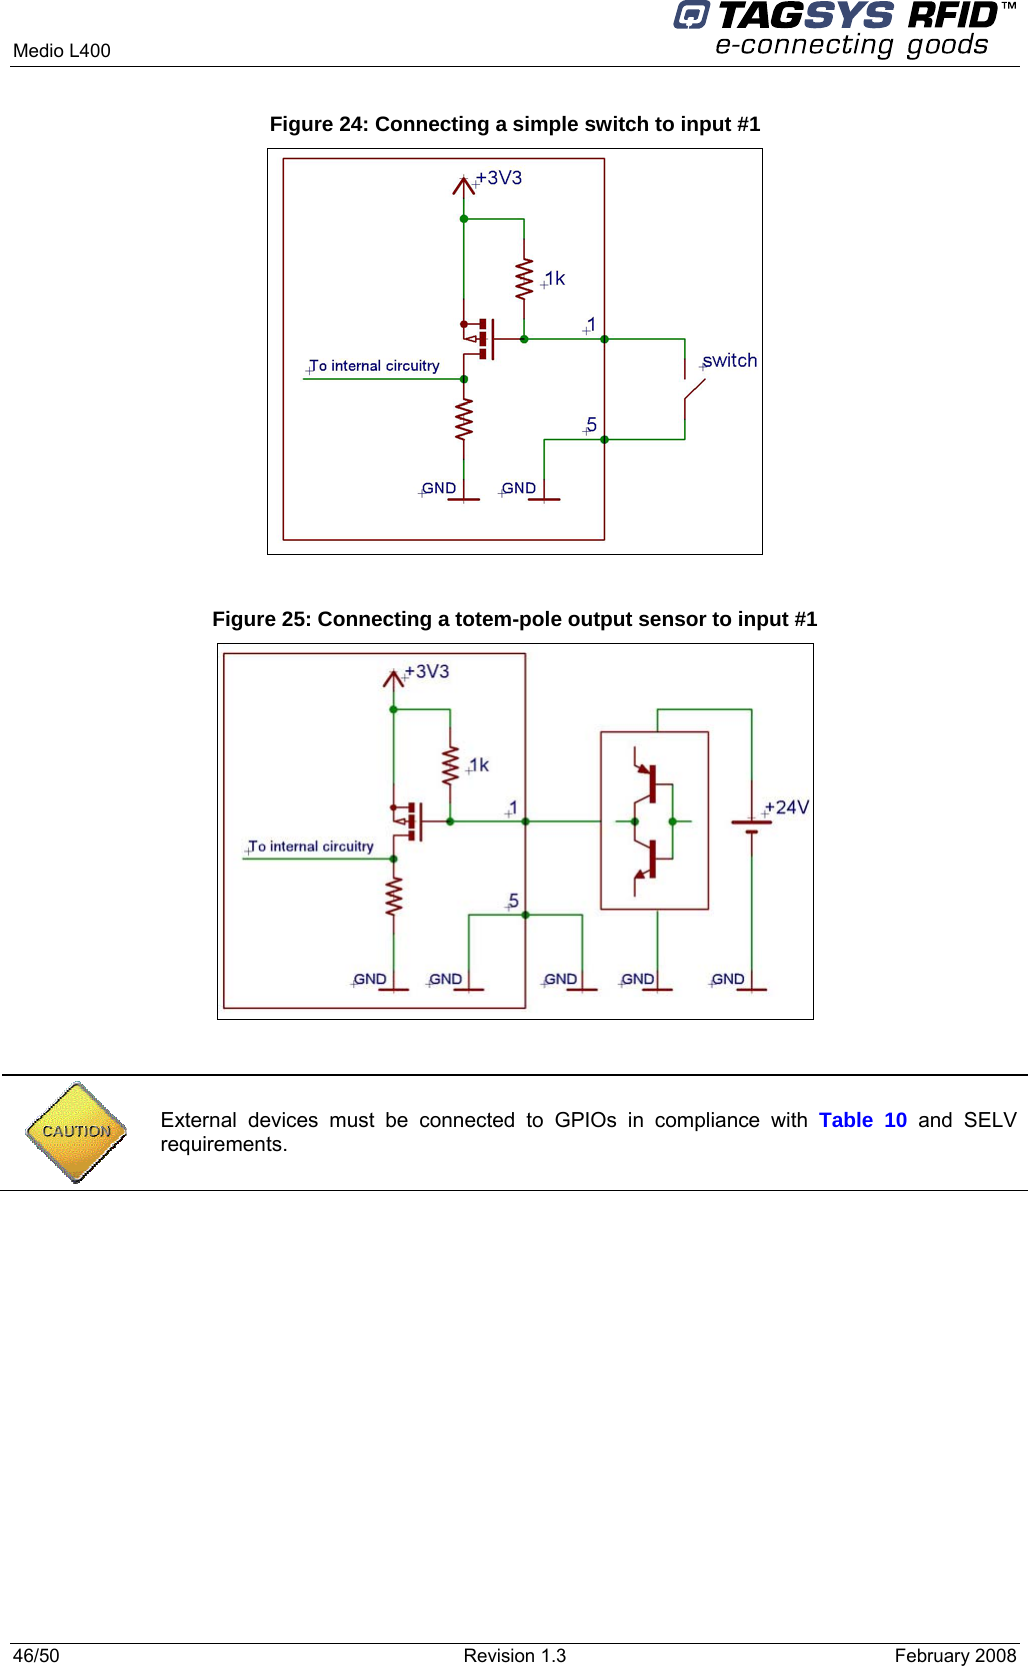  Medio L400     46/50  Revision 1.3  February 2008  Figure 24: Connecting a simple switch to input #1   Figure 25: Connecting a totem-pole output sensor to input #1    External devices must be connected to GPIOs in compliance with Table 10 and SELV requirements. 